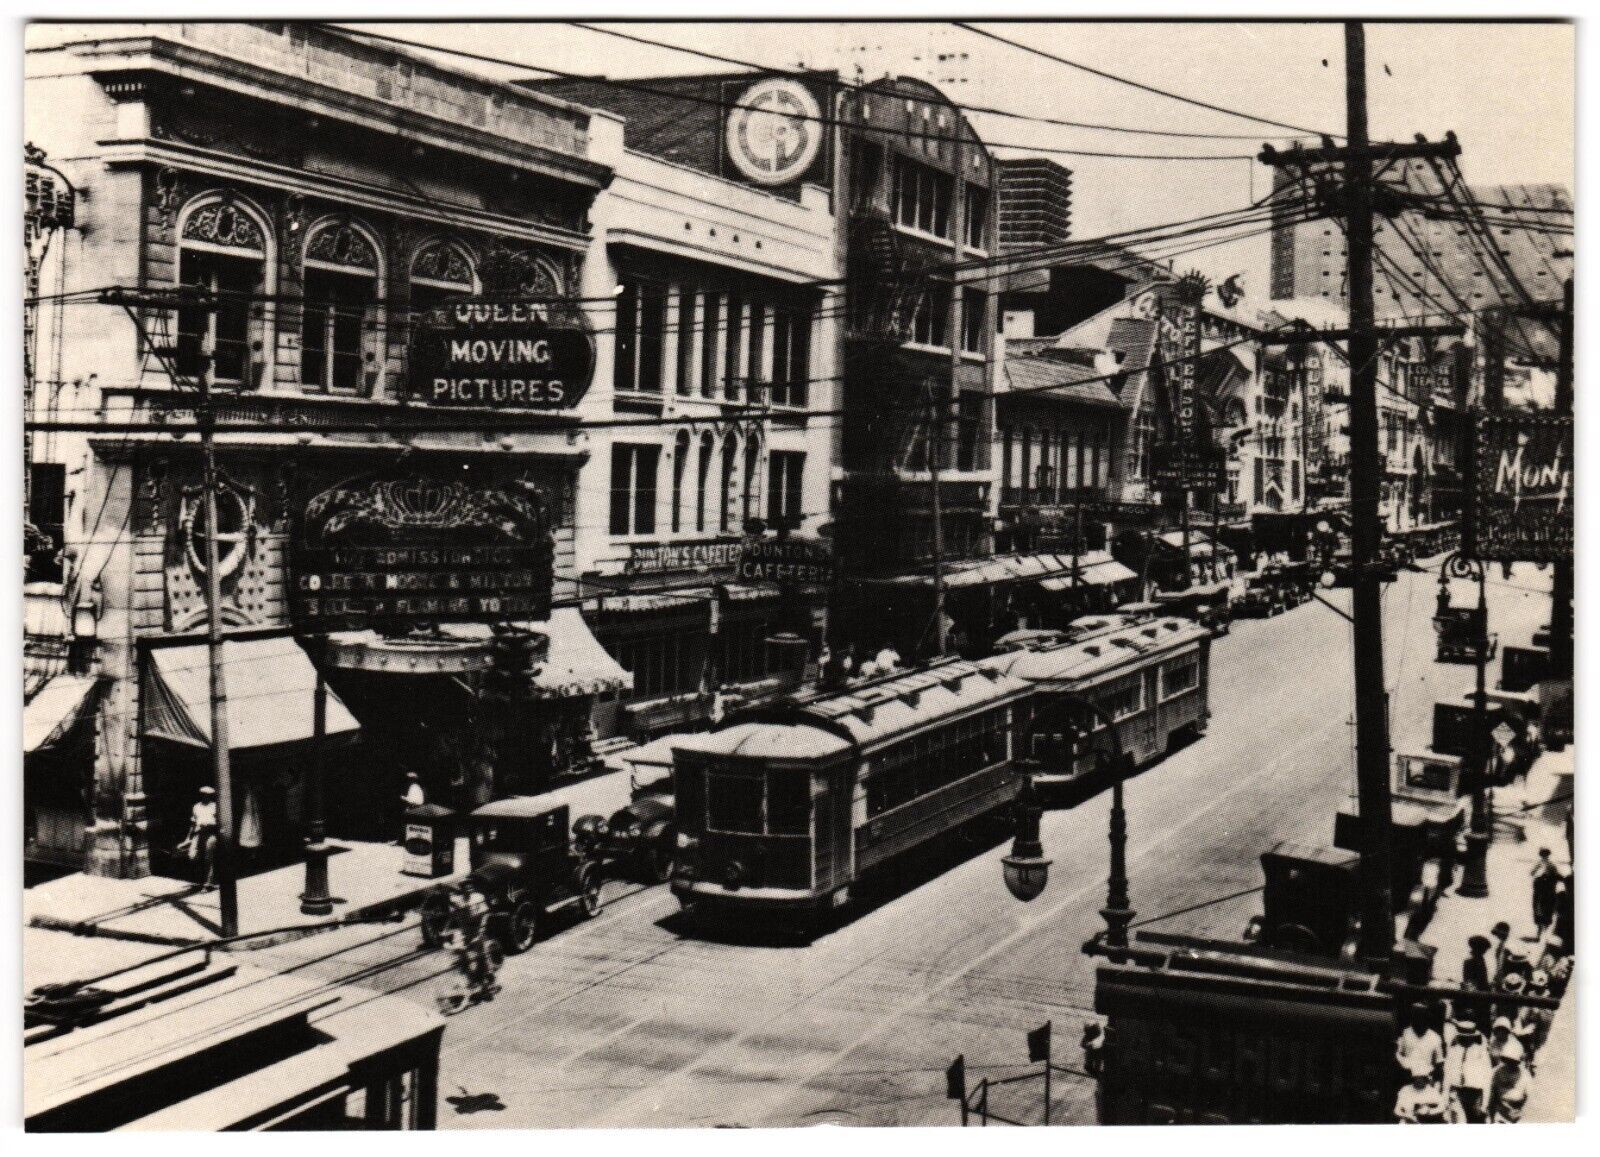 Theater Row Elm St. c1927 Street Cars Trolleys Cars Signs Postcard of Old Dallas